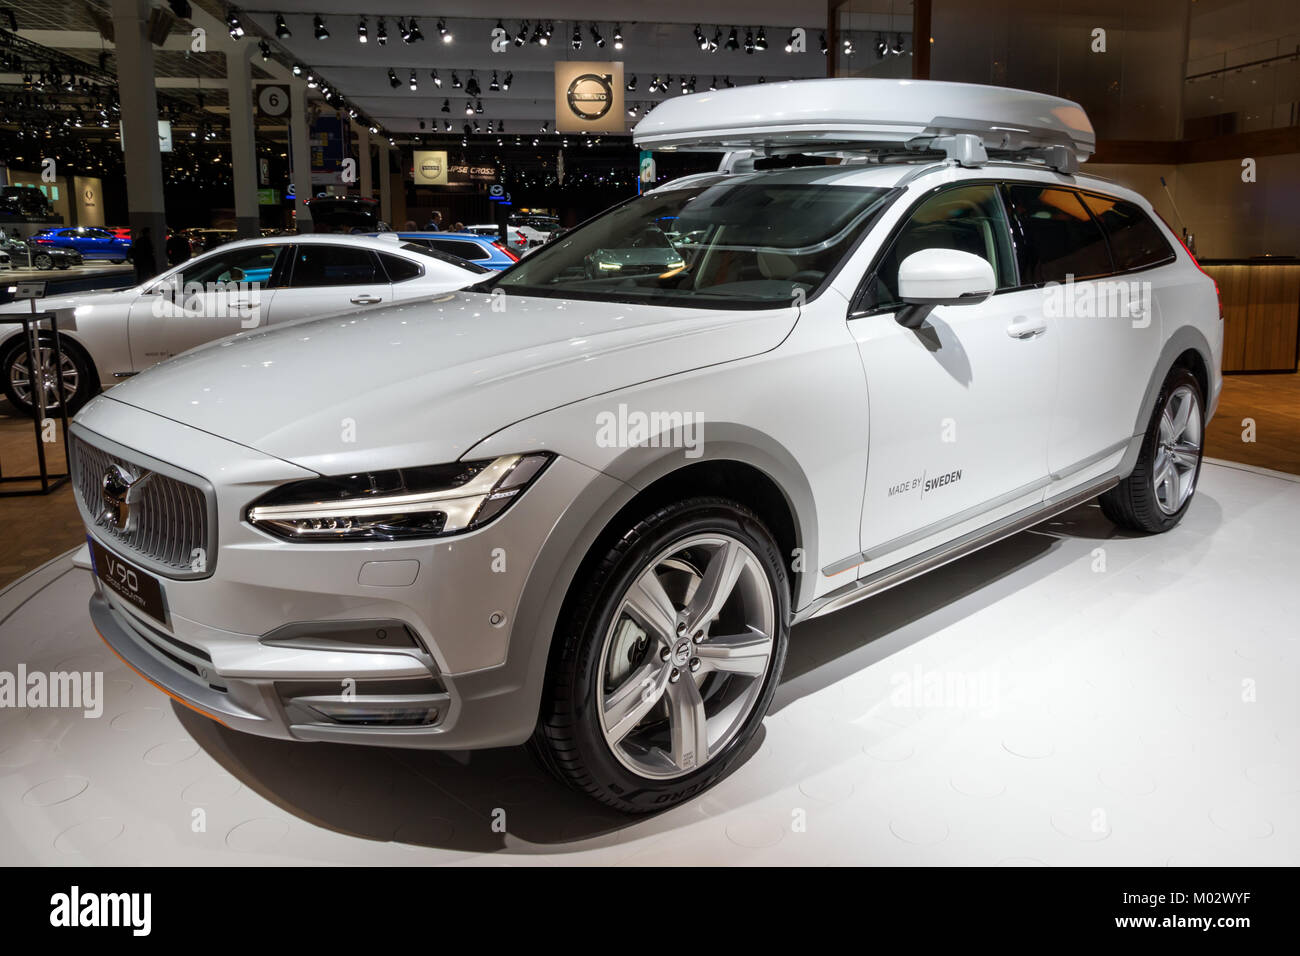 Brussels Jan 10 18 Volvo V90 Cross Country Car Presented At The Brussels Motor Show Stock Photo Alamy